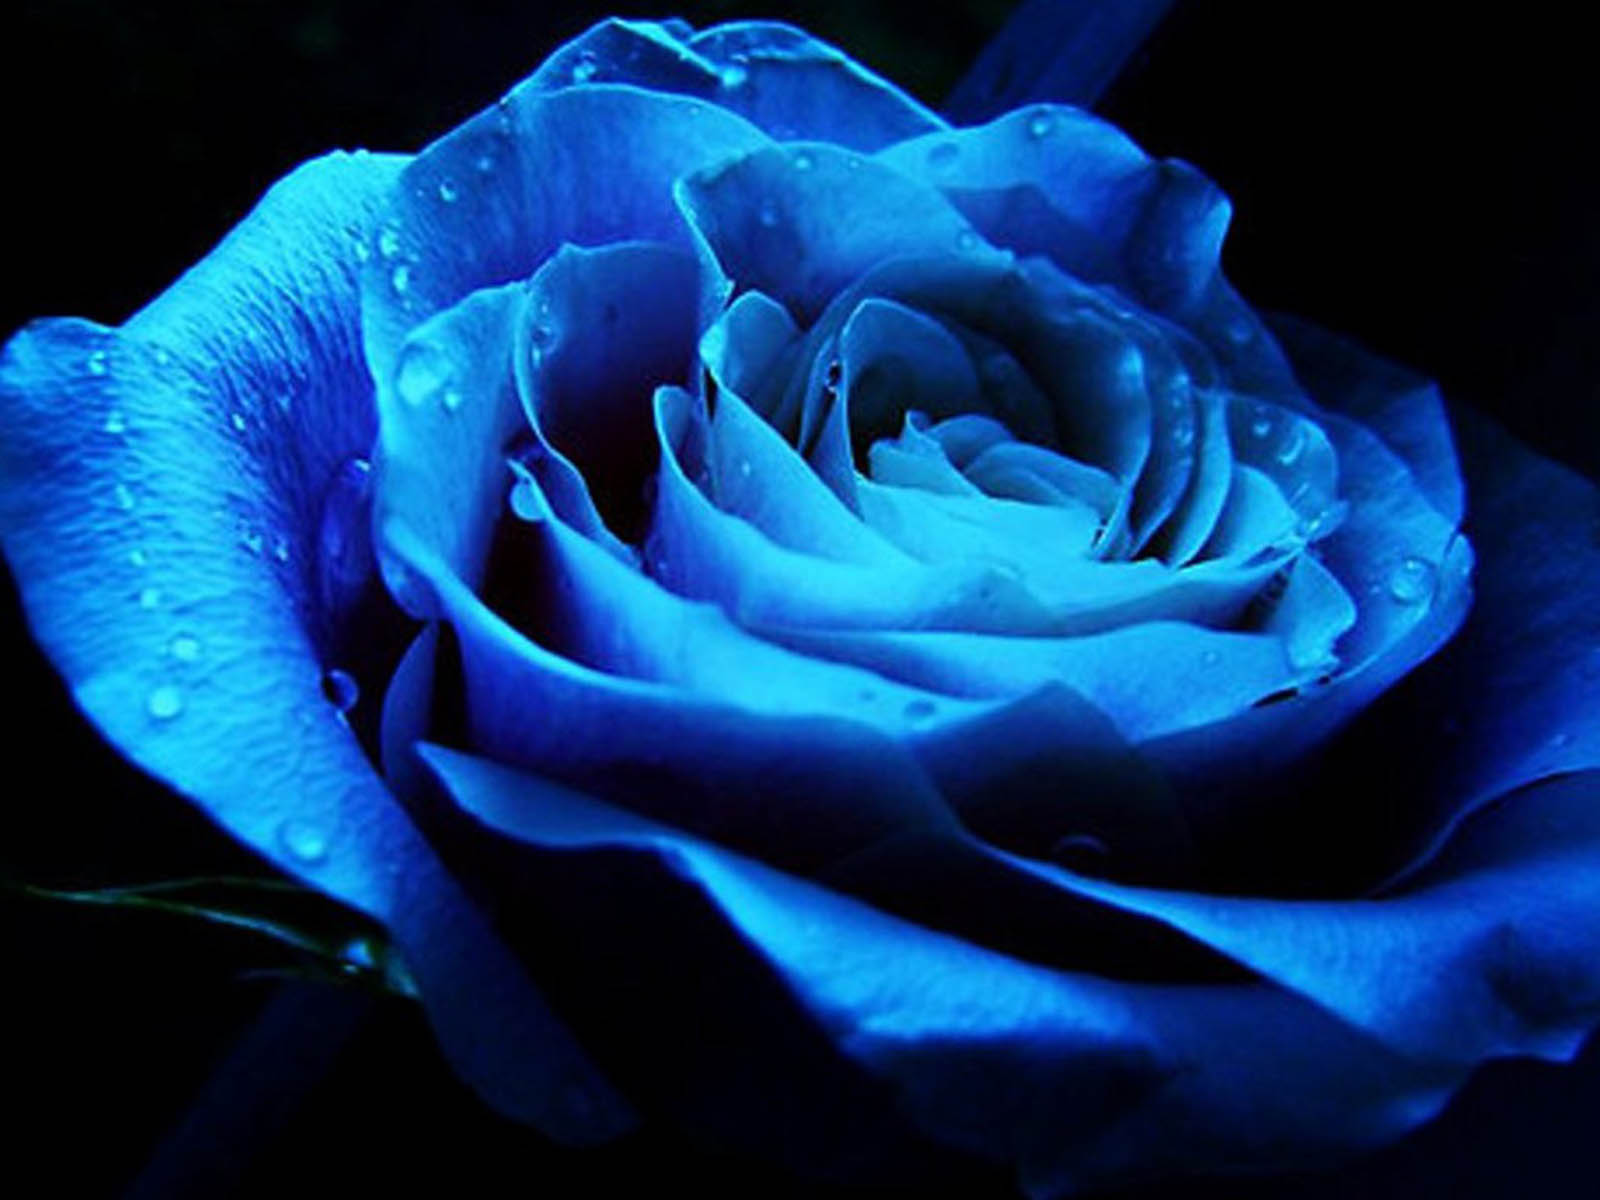 Tag Blue Rose Wallpaper Background Paos Pictures And Image For